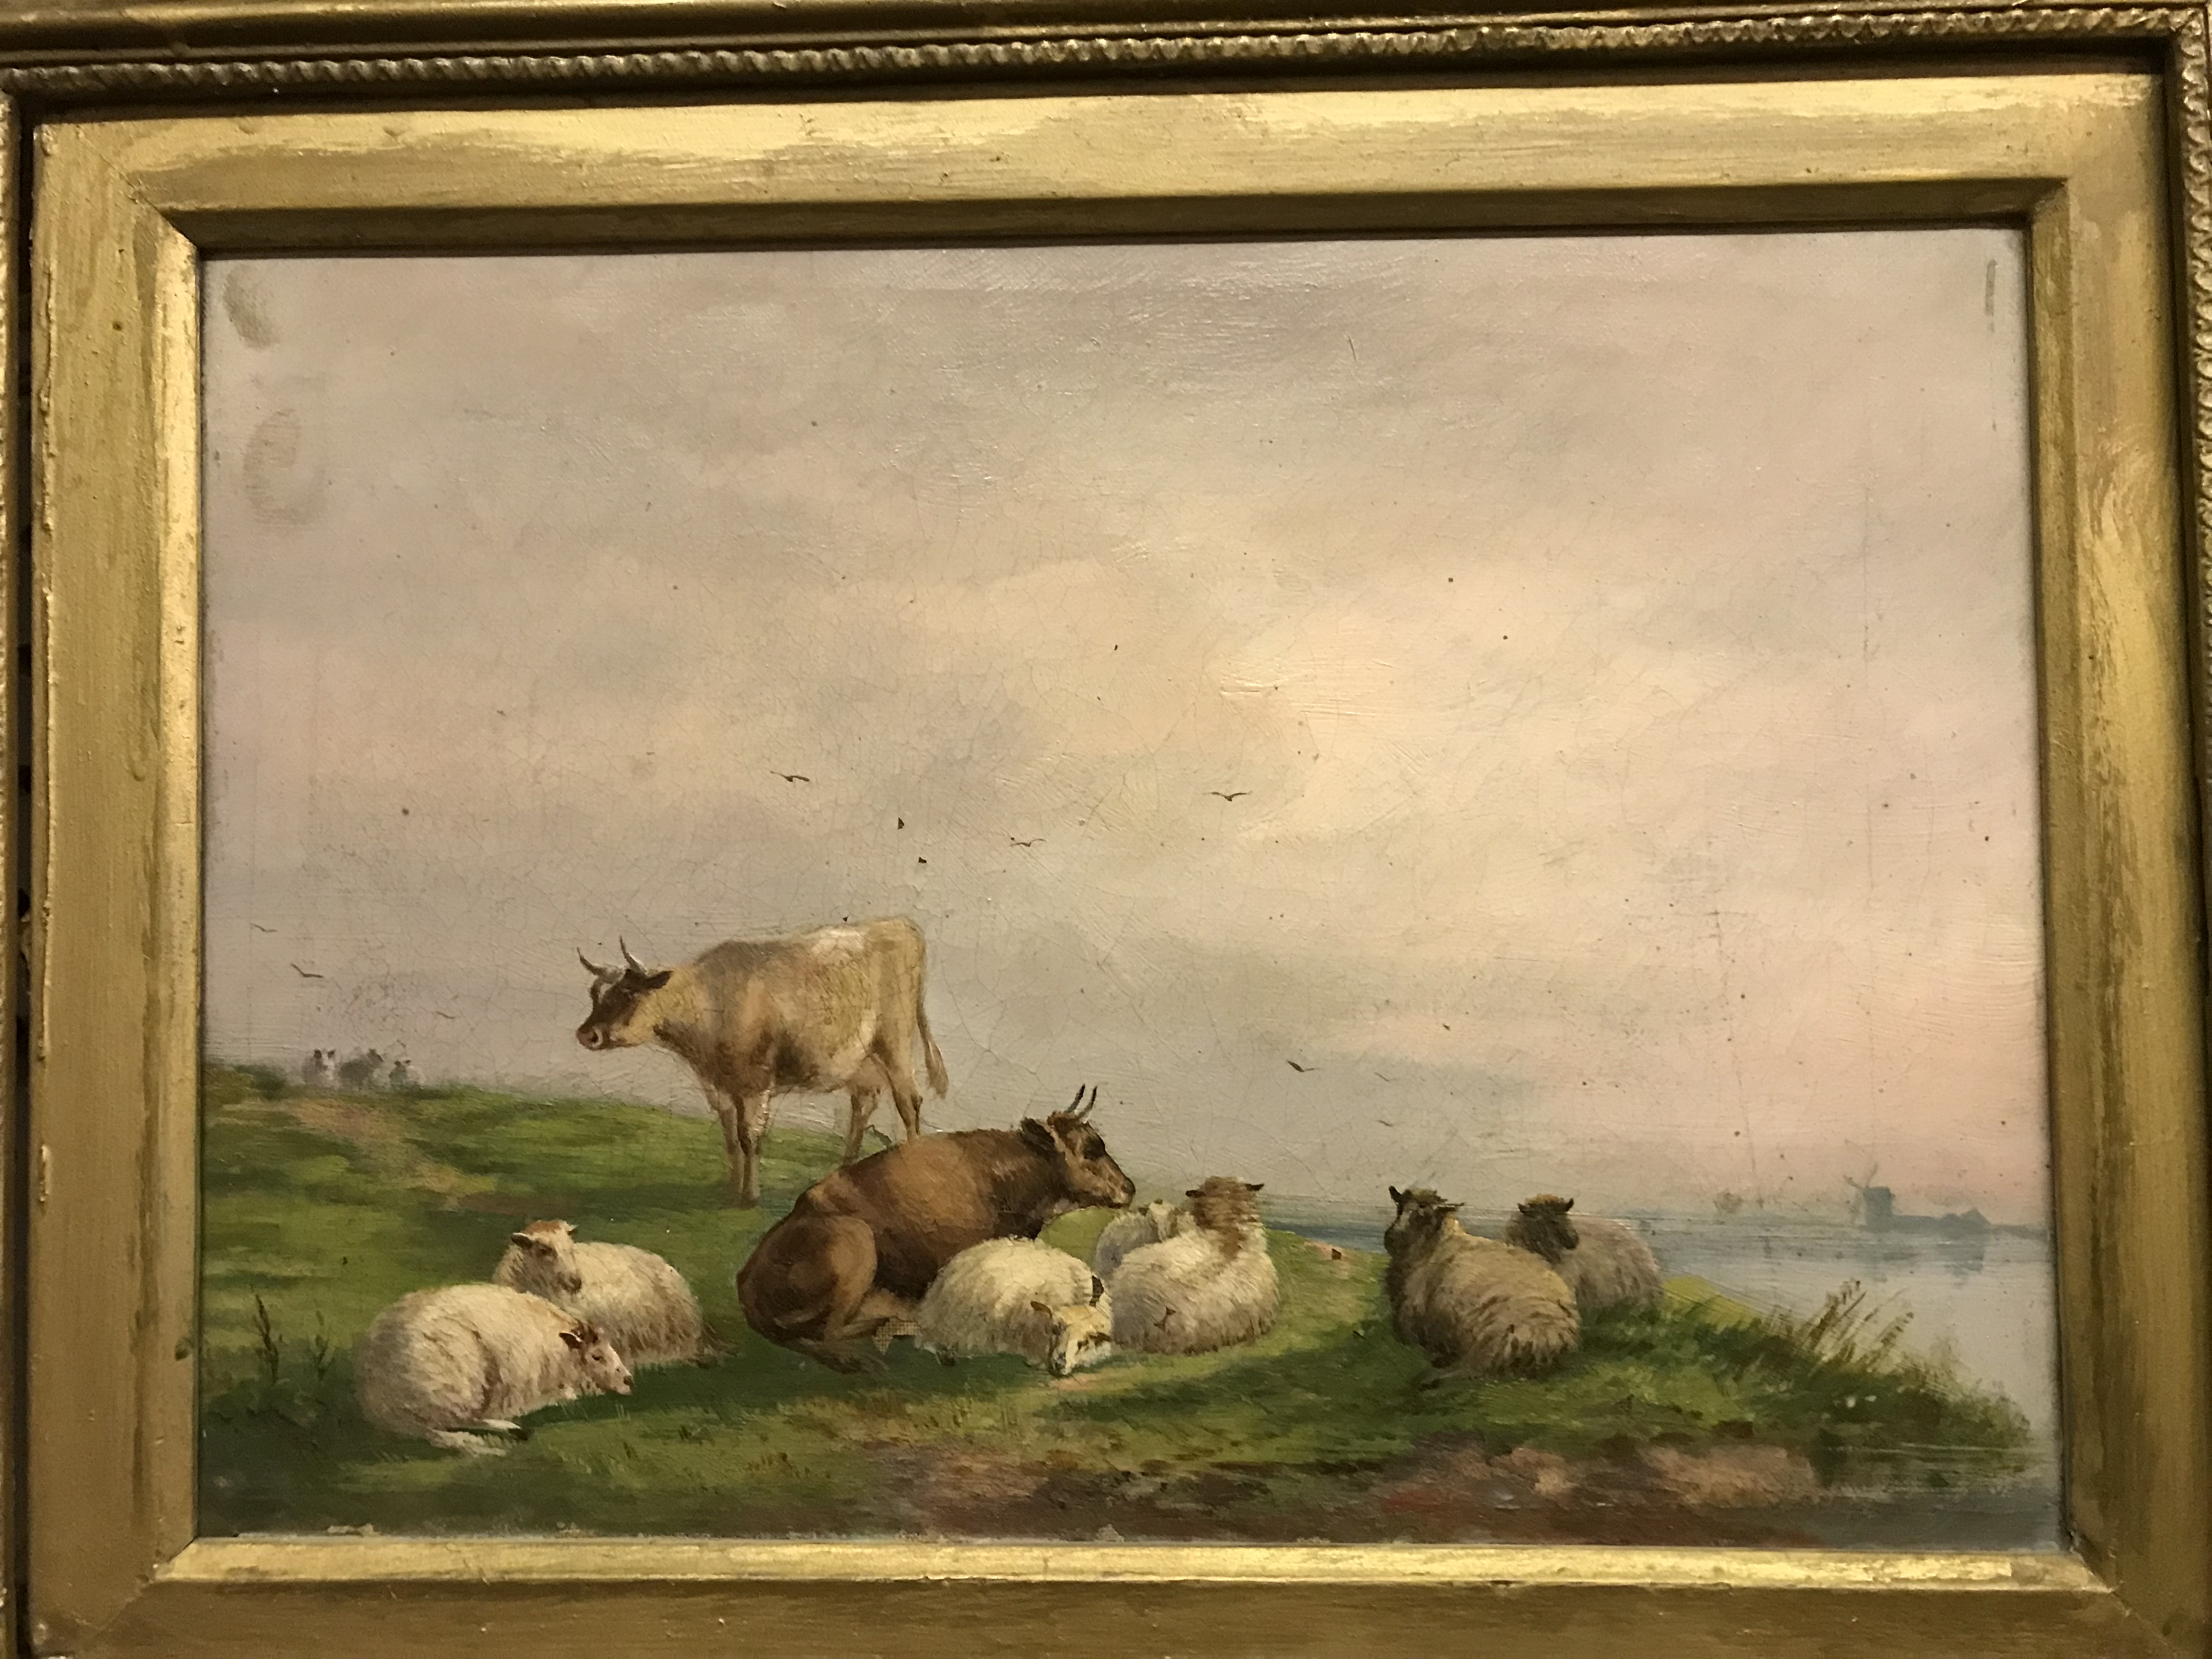 19TH CENTURY ENGLISH SCHOOL "Study of cattle by river with windmills in mid ground", oil on canvas,